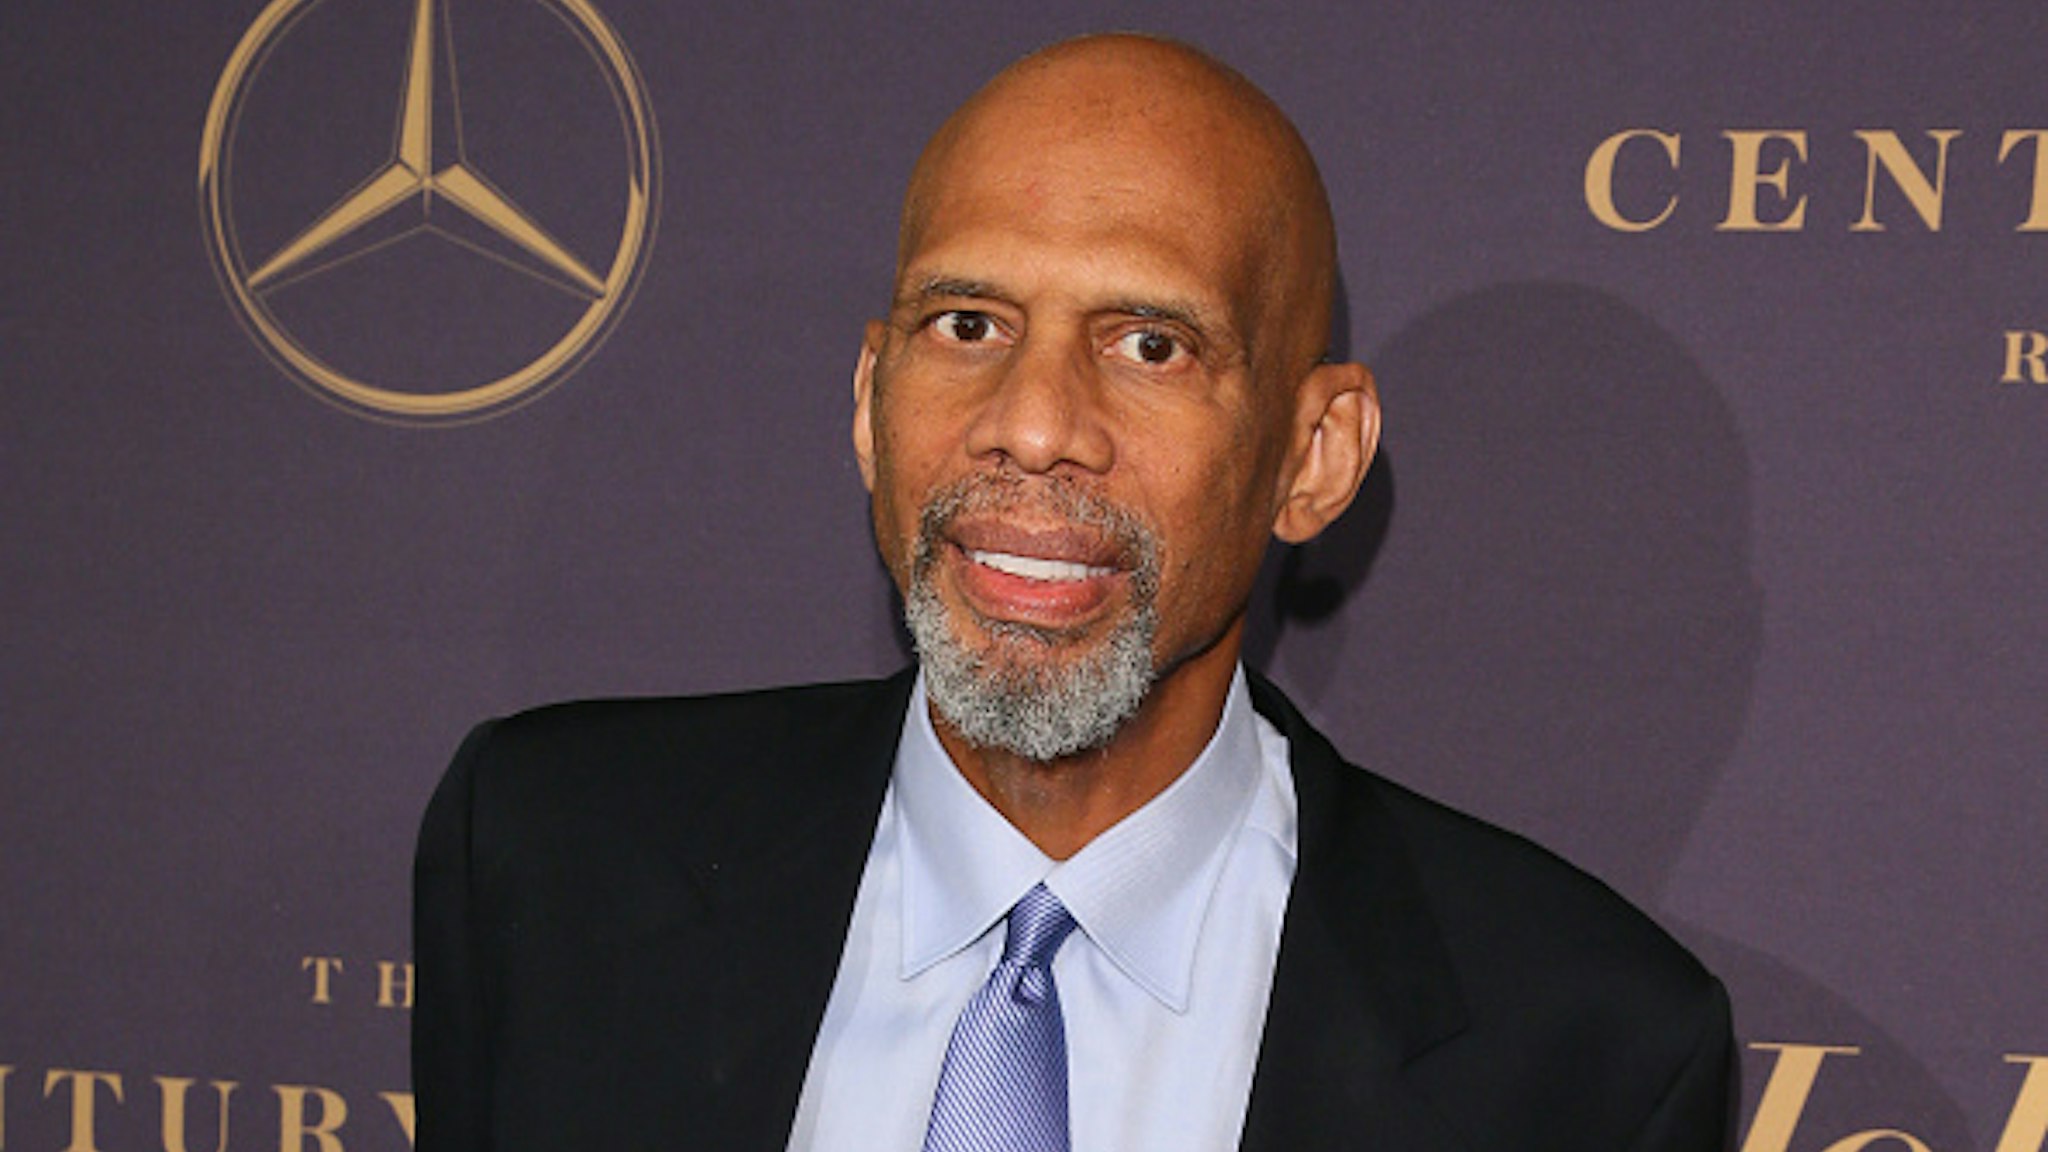 This photo taken February 4, 2019 shows Kareem Abdul-Jabbar at the Hollywood Reporter's 7th Annual Nominees Night in Beverly Hills, California. (Photo by JEAN-BAPTISTE LACROIX / AFP) / ALTERNATE CROP